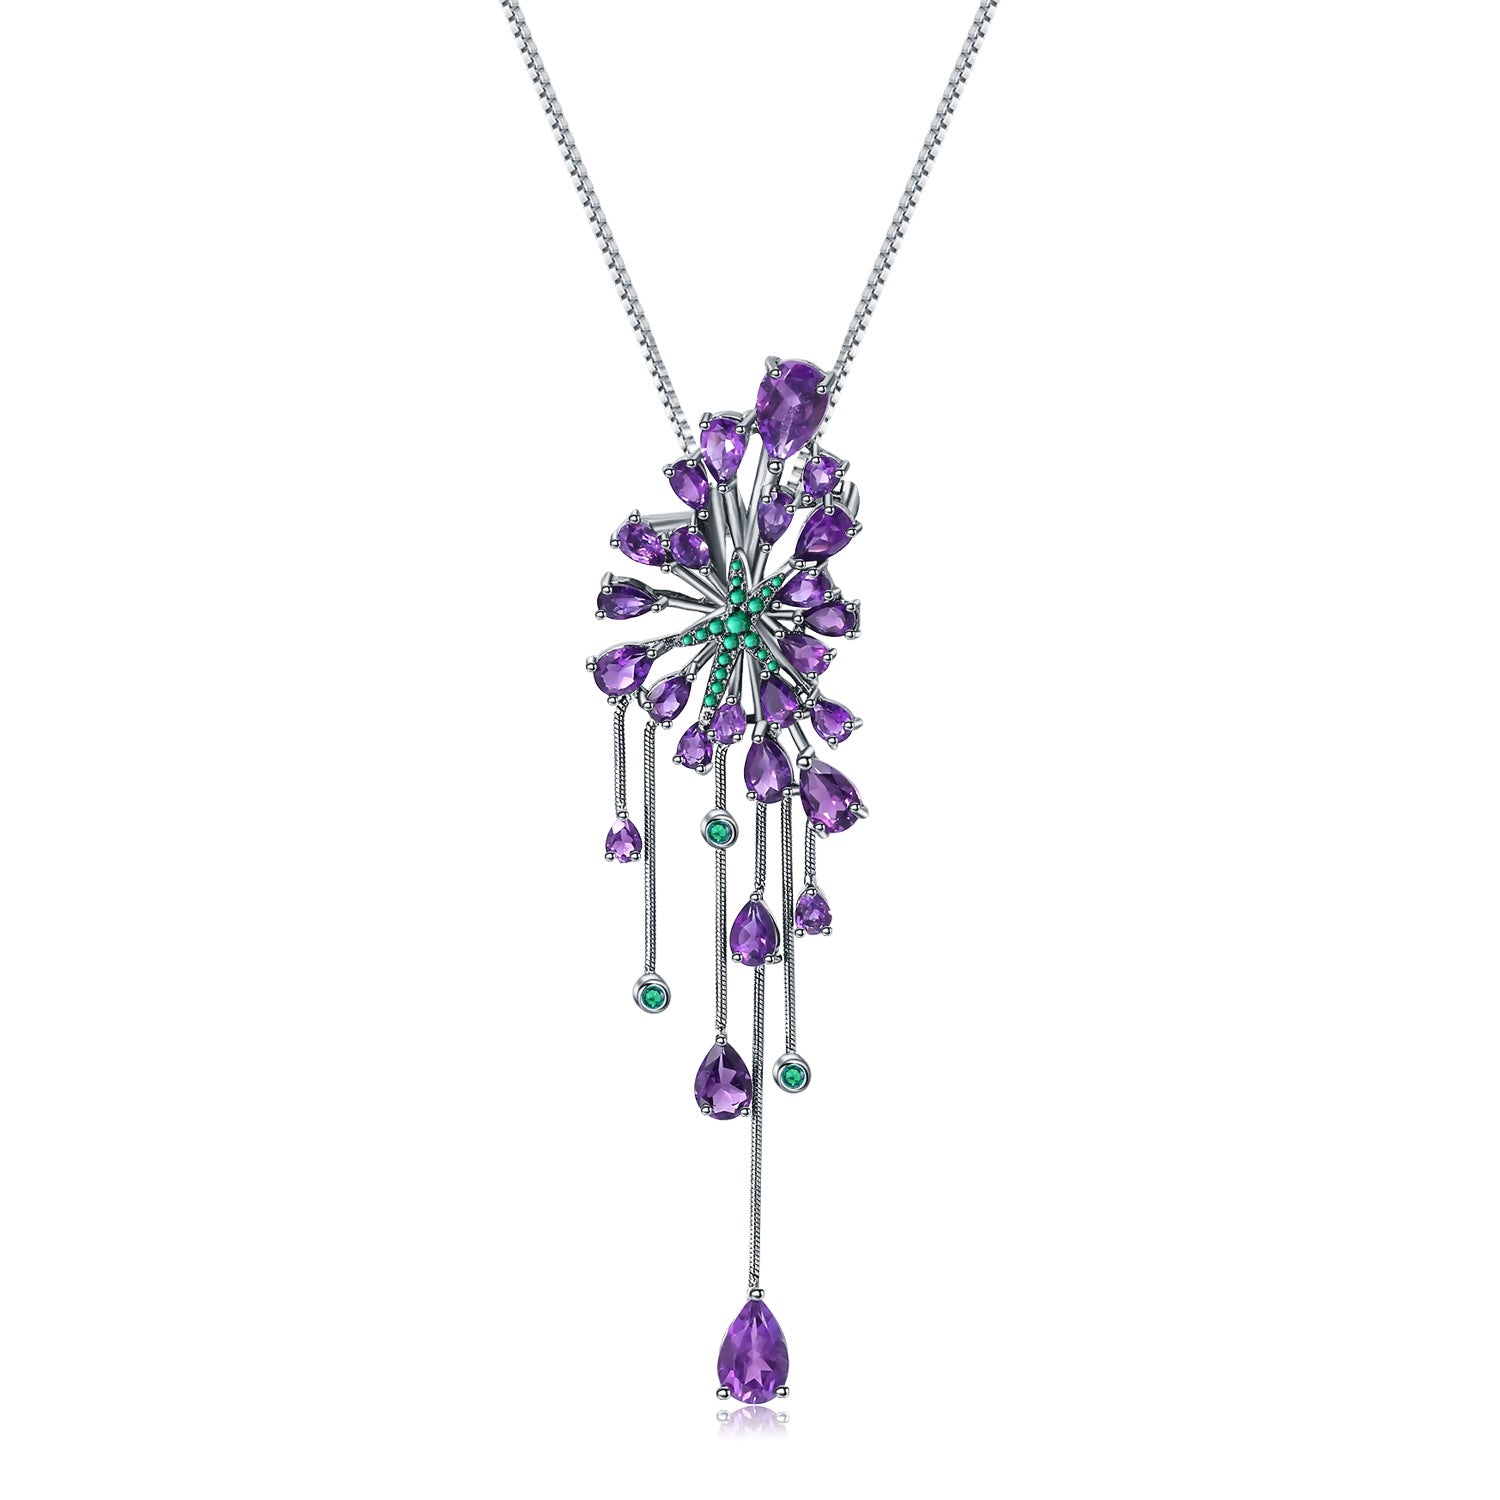 Starry Sky High Class Jewelry Natural Amethyst Tassels Pendant Silver Necklace for Women